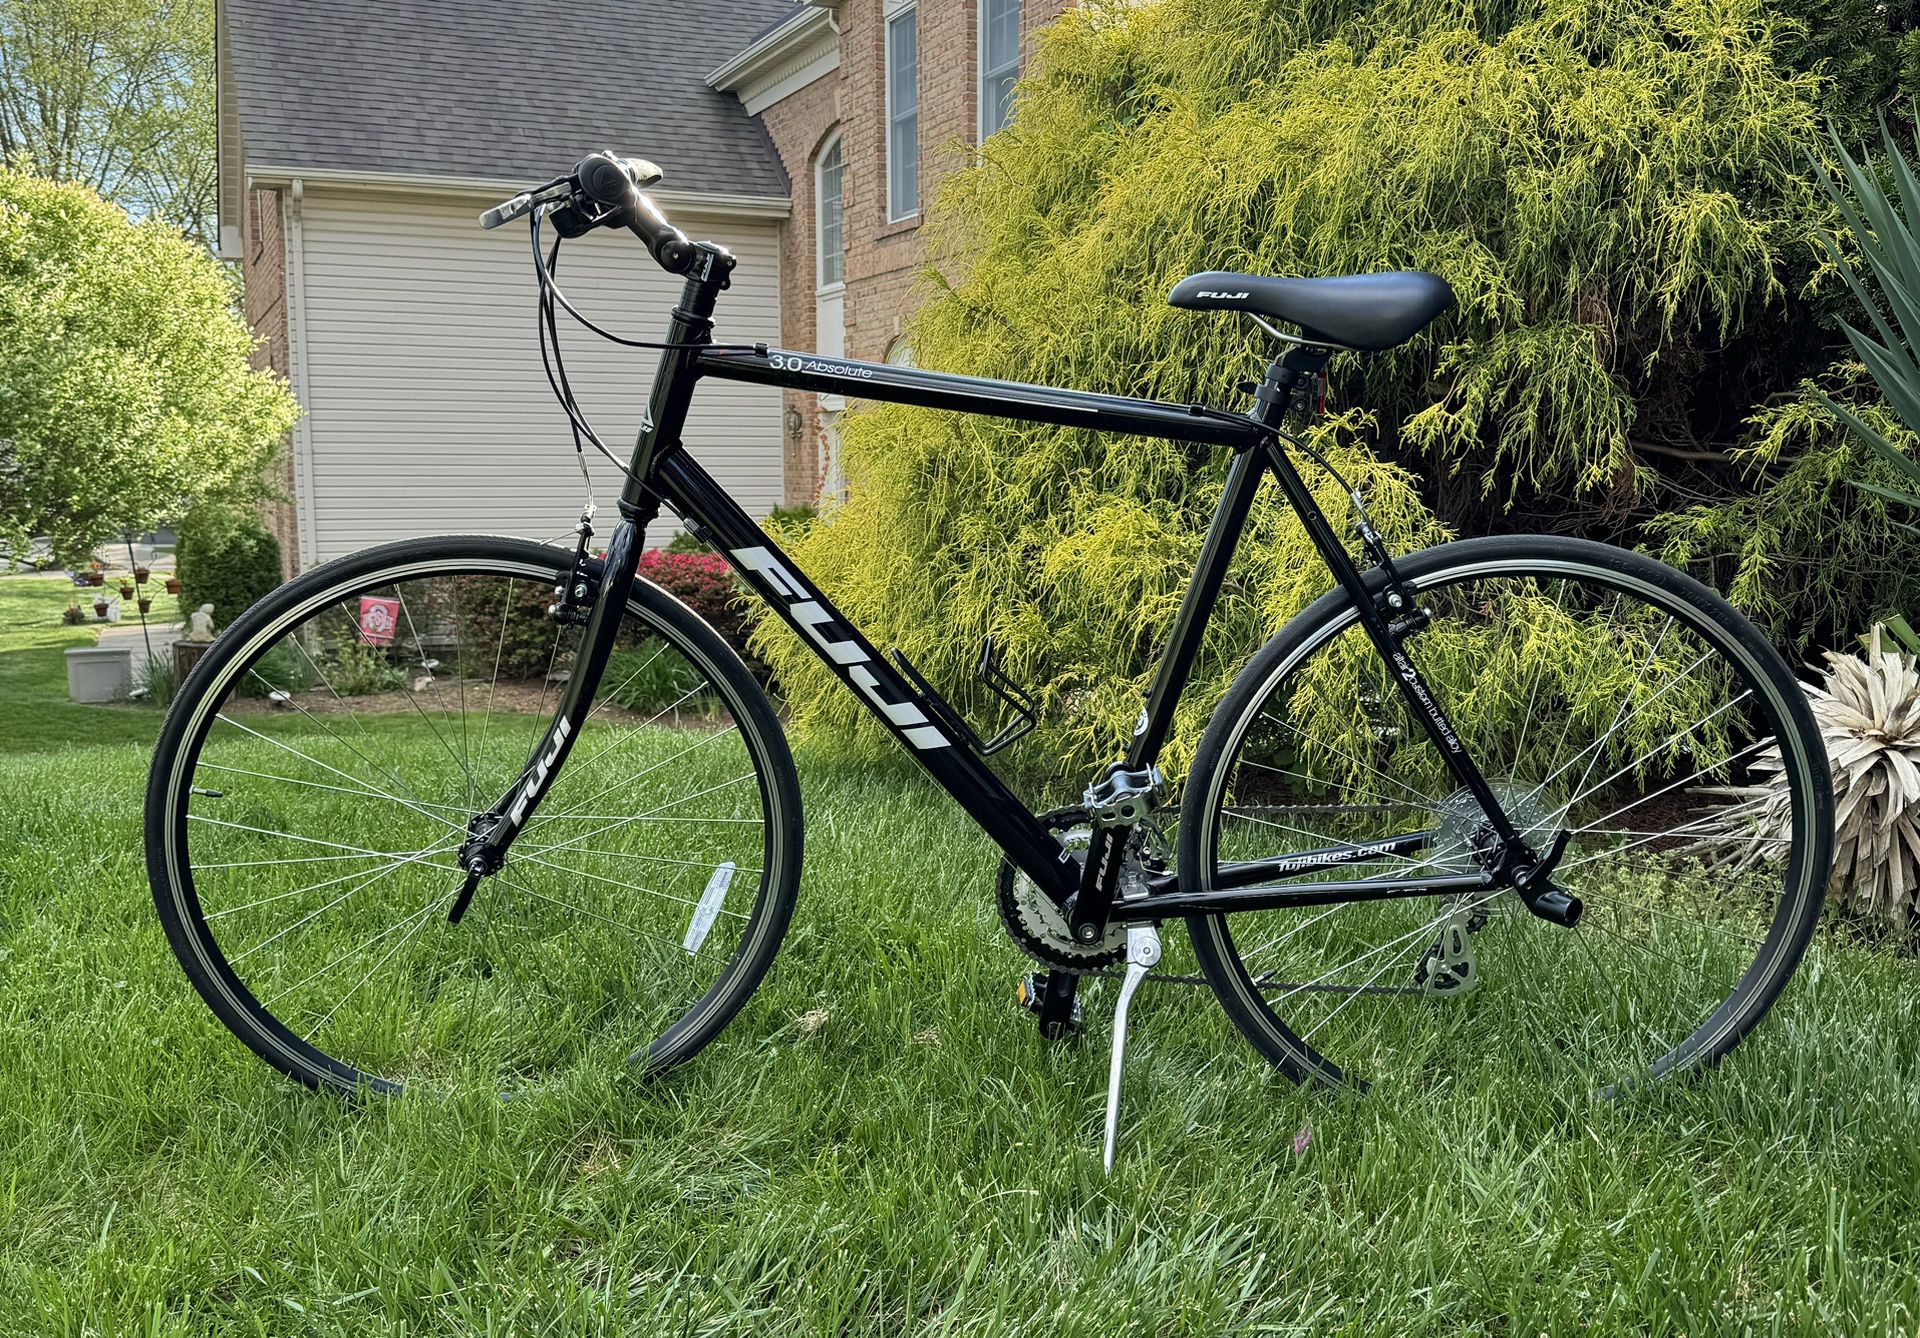 Fuji 3.0 Absolute Hybrid Road Bike700C Wheels. 24 Speed. 23” Large Aluminum Frame. Freshly Tuned. All Gears Shifting Smoothly. Perfect Brakes. Mint